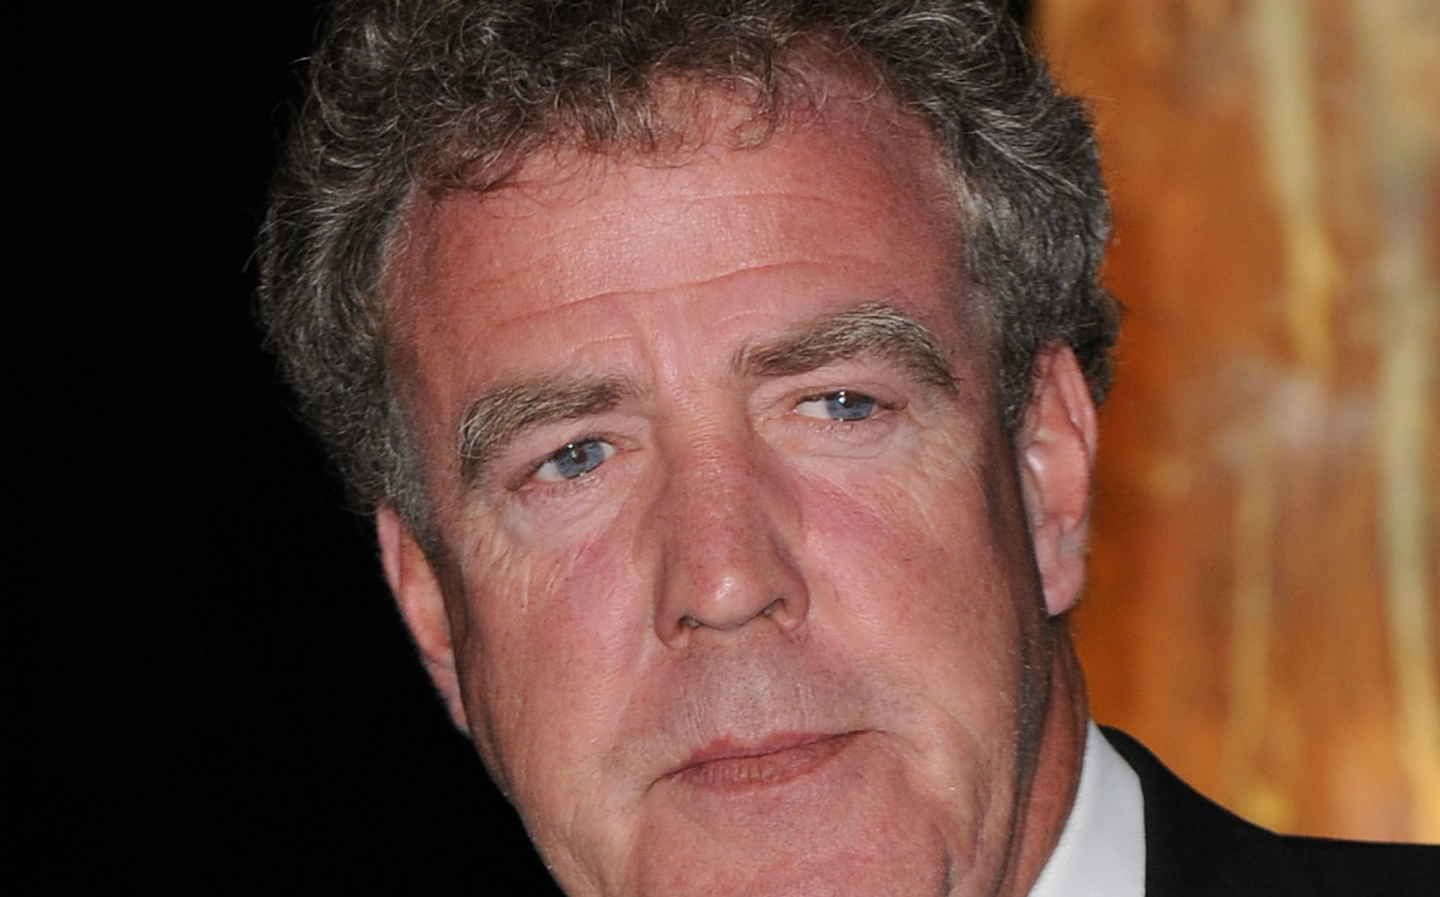 And on that bombshell… Jeremy Clarkson to host Who Wants To Be A Millionaire